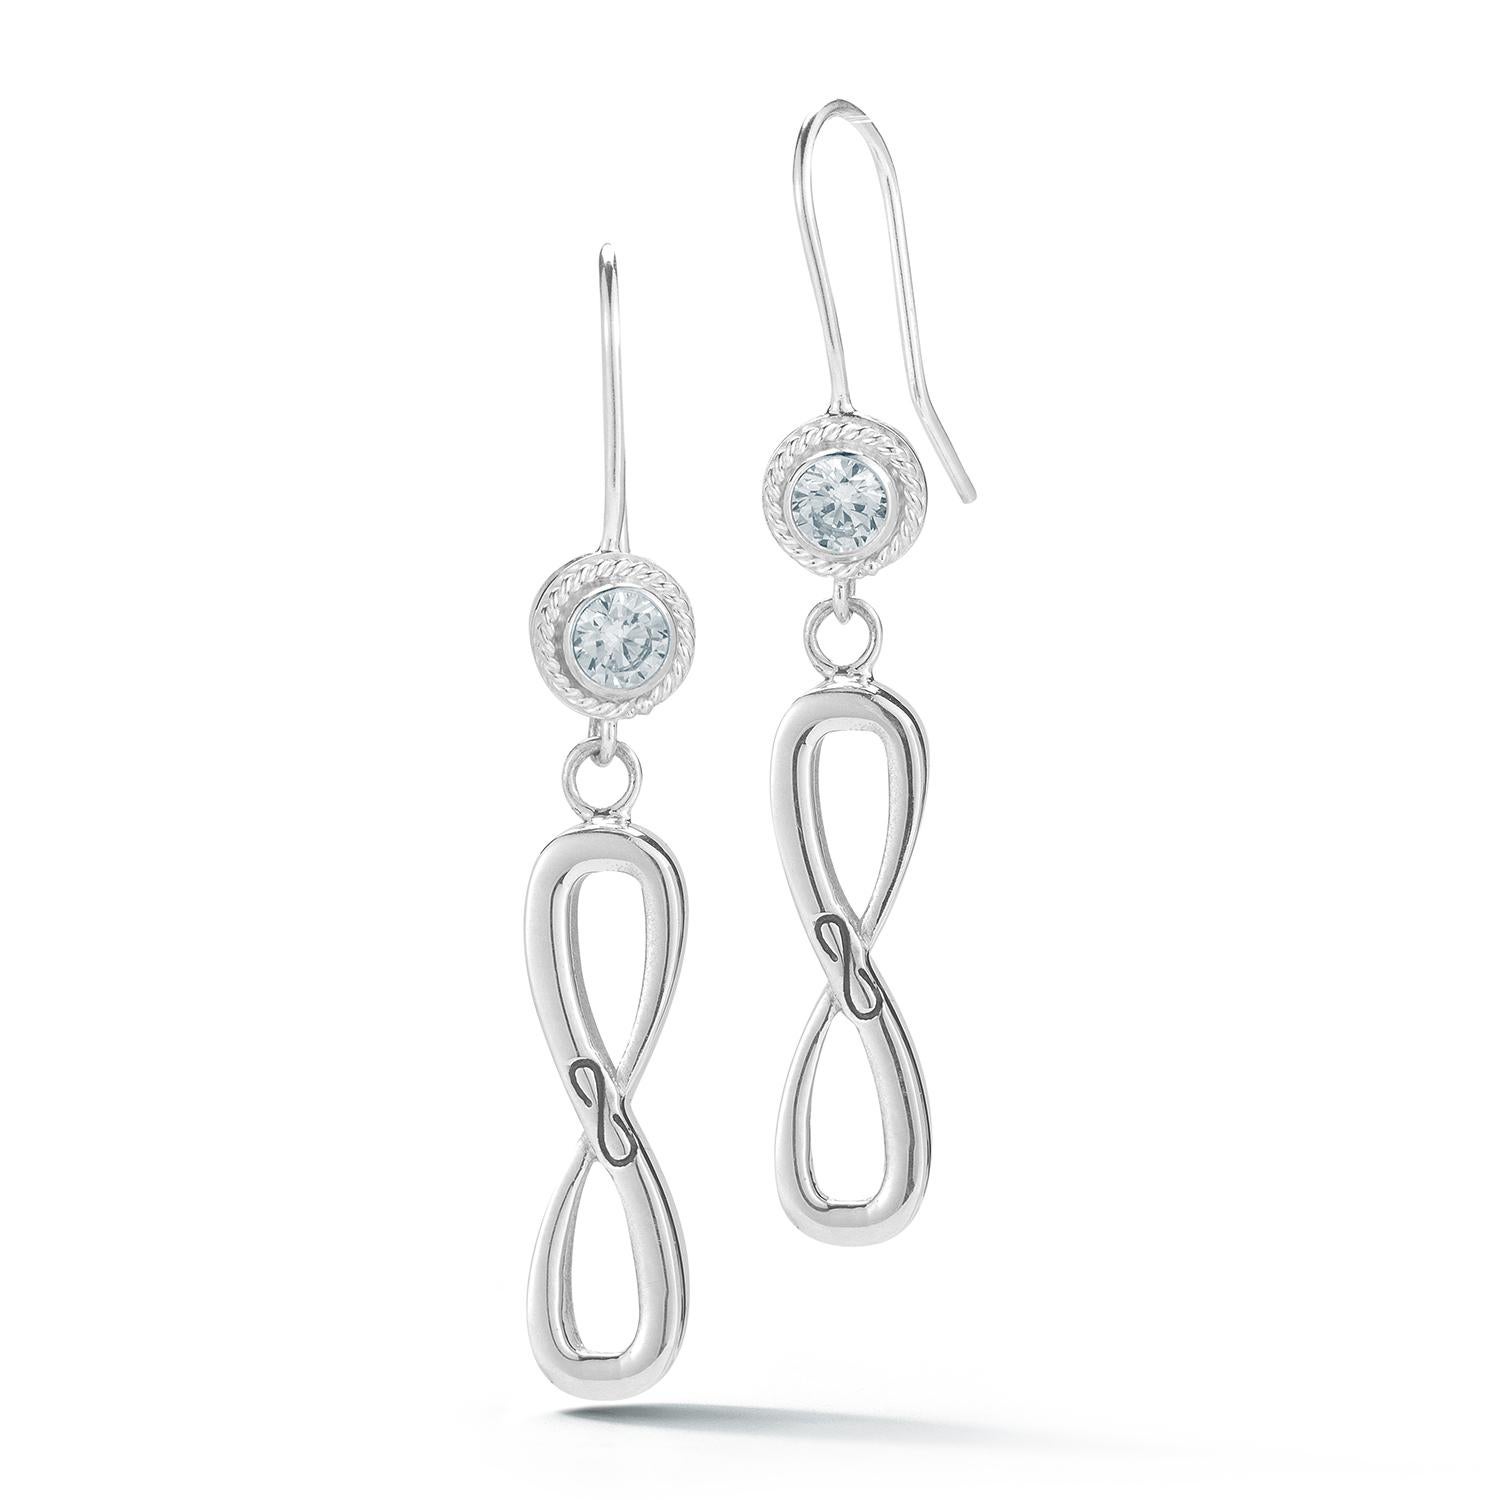 Designed in NYC

.925 Sterling Silver 2 x 7 mm Dark Blue Topaz Infinity Stone Stud Wire Hook Earrings. When it comes to self-expression, the style possibilities are endless. Infinity stone stud wire hook earrings:

Sterling silver 
High-polish